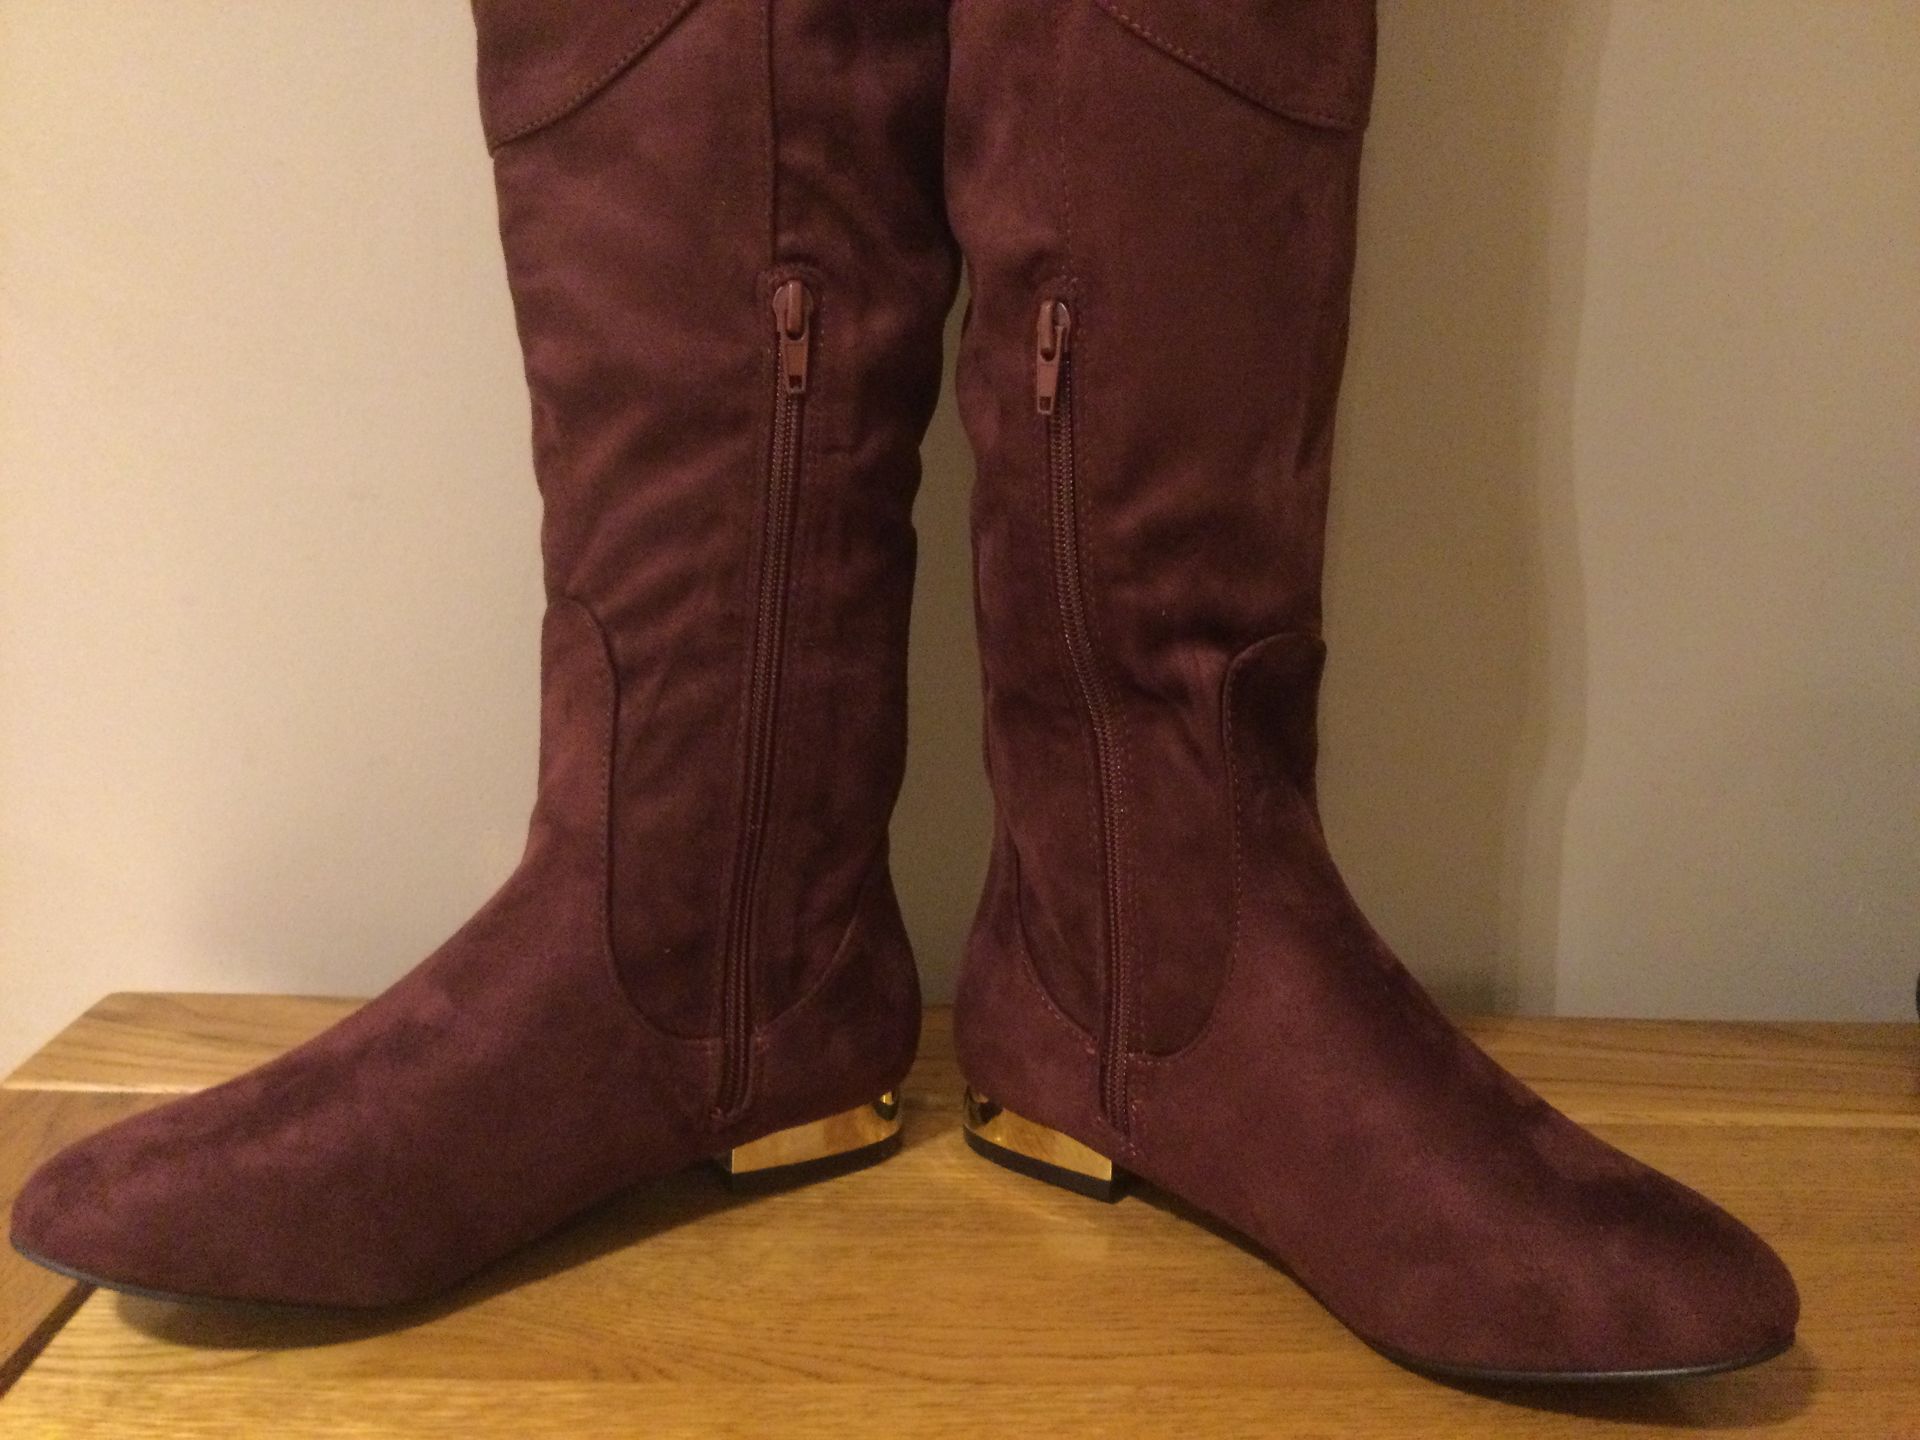 Dolcis “Katie” Long Boots, Low Block Heel, Size 4, Burgundy- New RRP £55.00 - Image 4 of 7